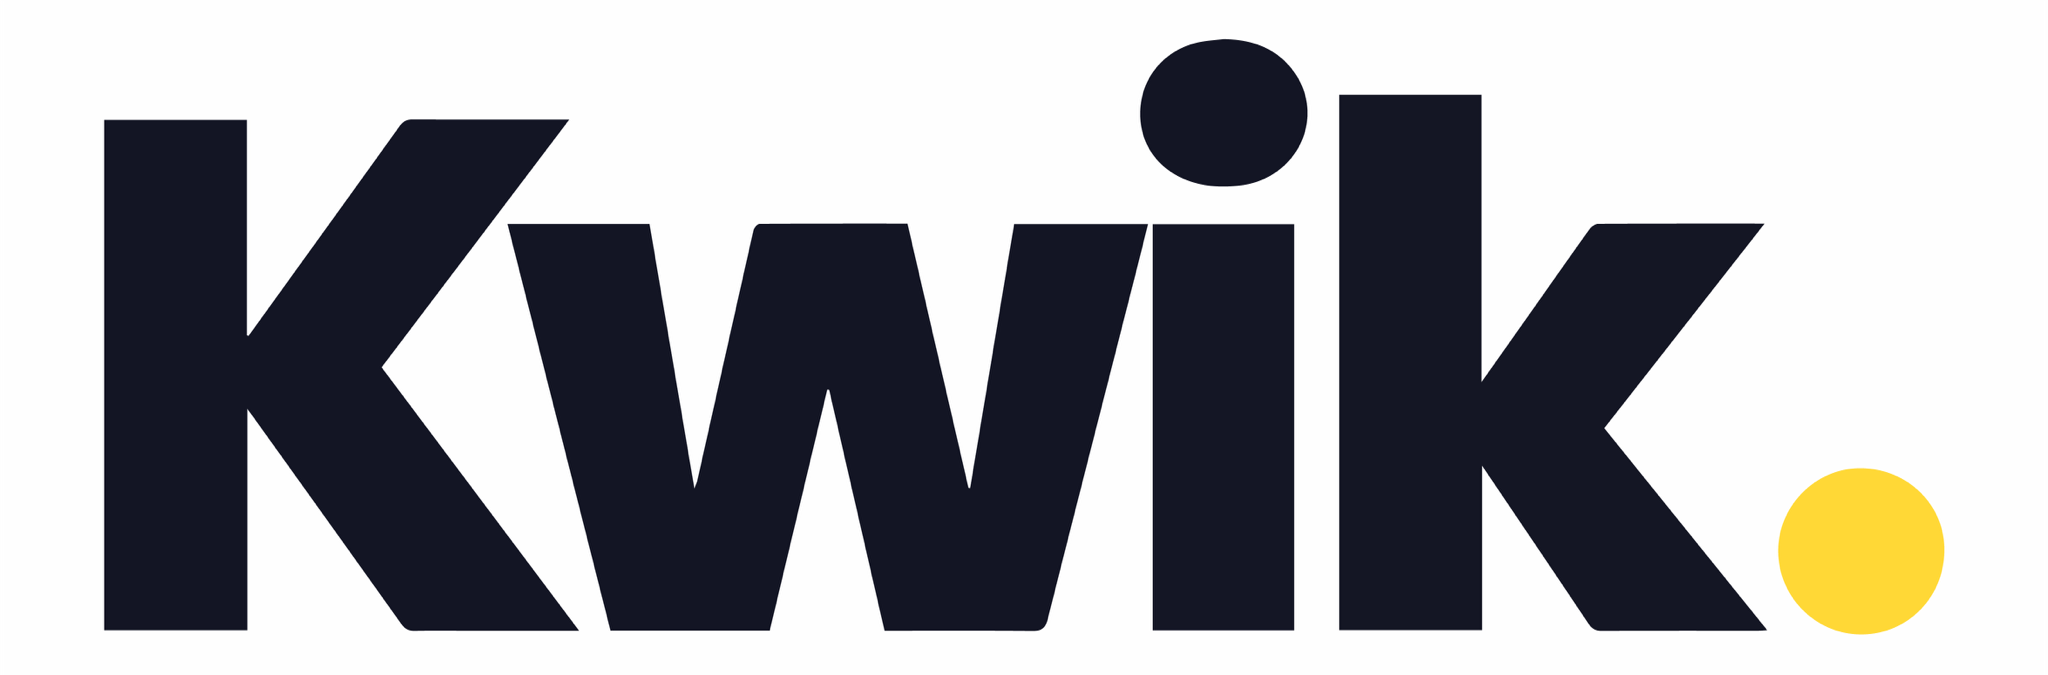 KwikClick, Inc. (Kwik) Completes Integration Of Its Centralized Commission Engine, Enabling Electronic And Automatic Link Sharing To Reward Influencer Campaigns